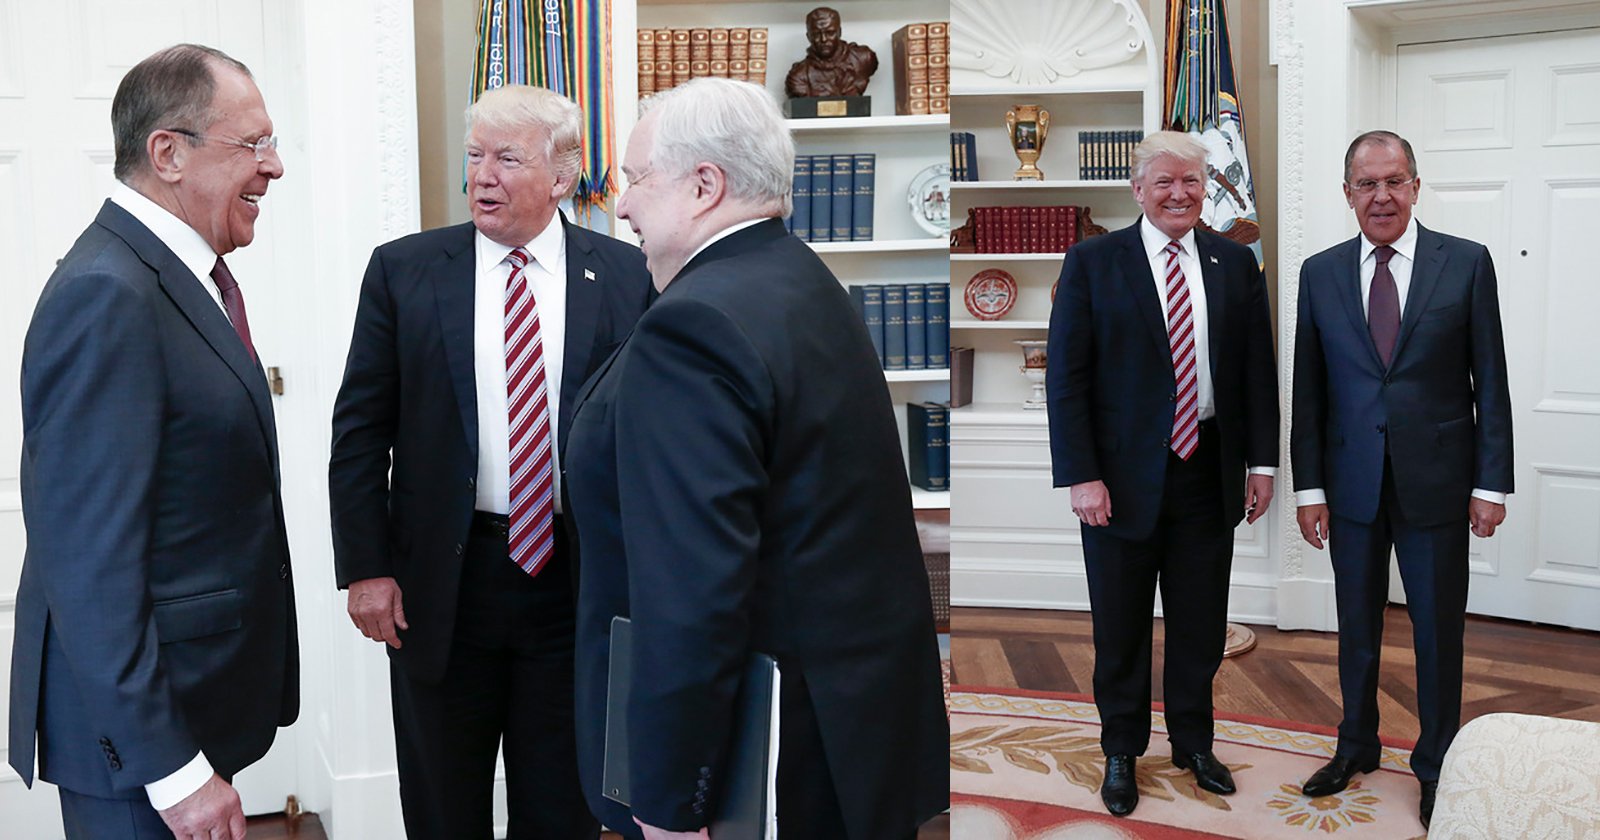  russian photographer oval office raises red flags media 